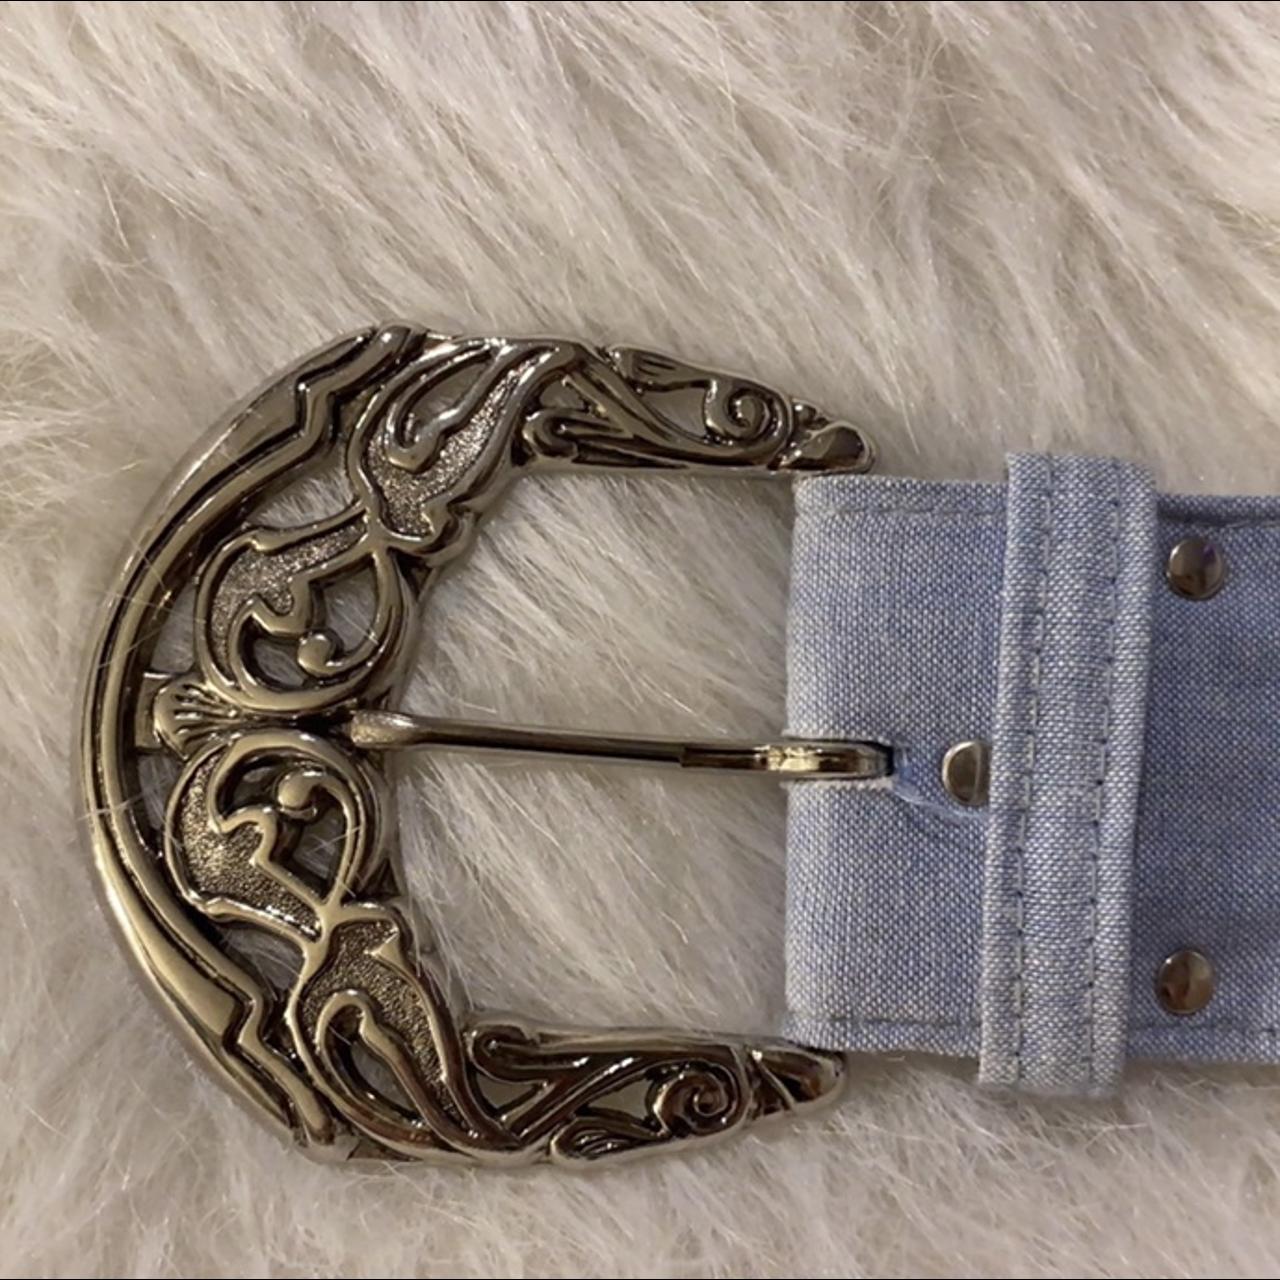 80s Whimsigoth Brass and Stone Belt Buckle. The - Depop